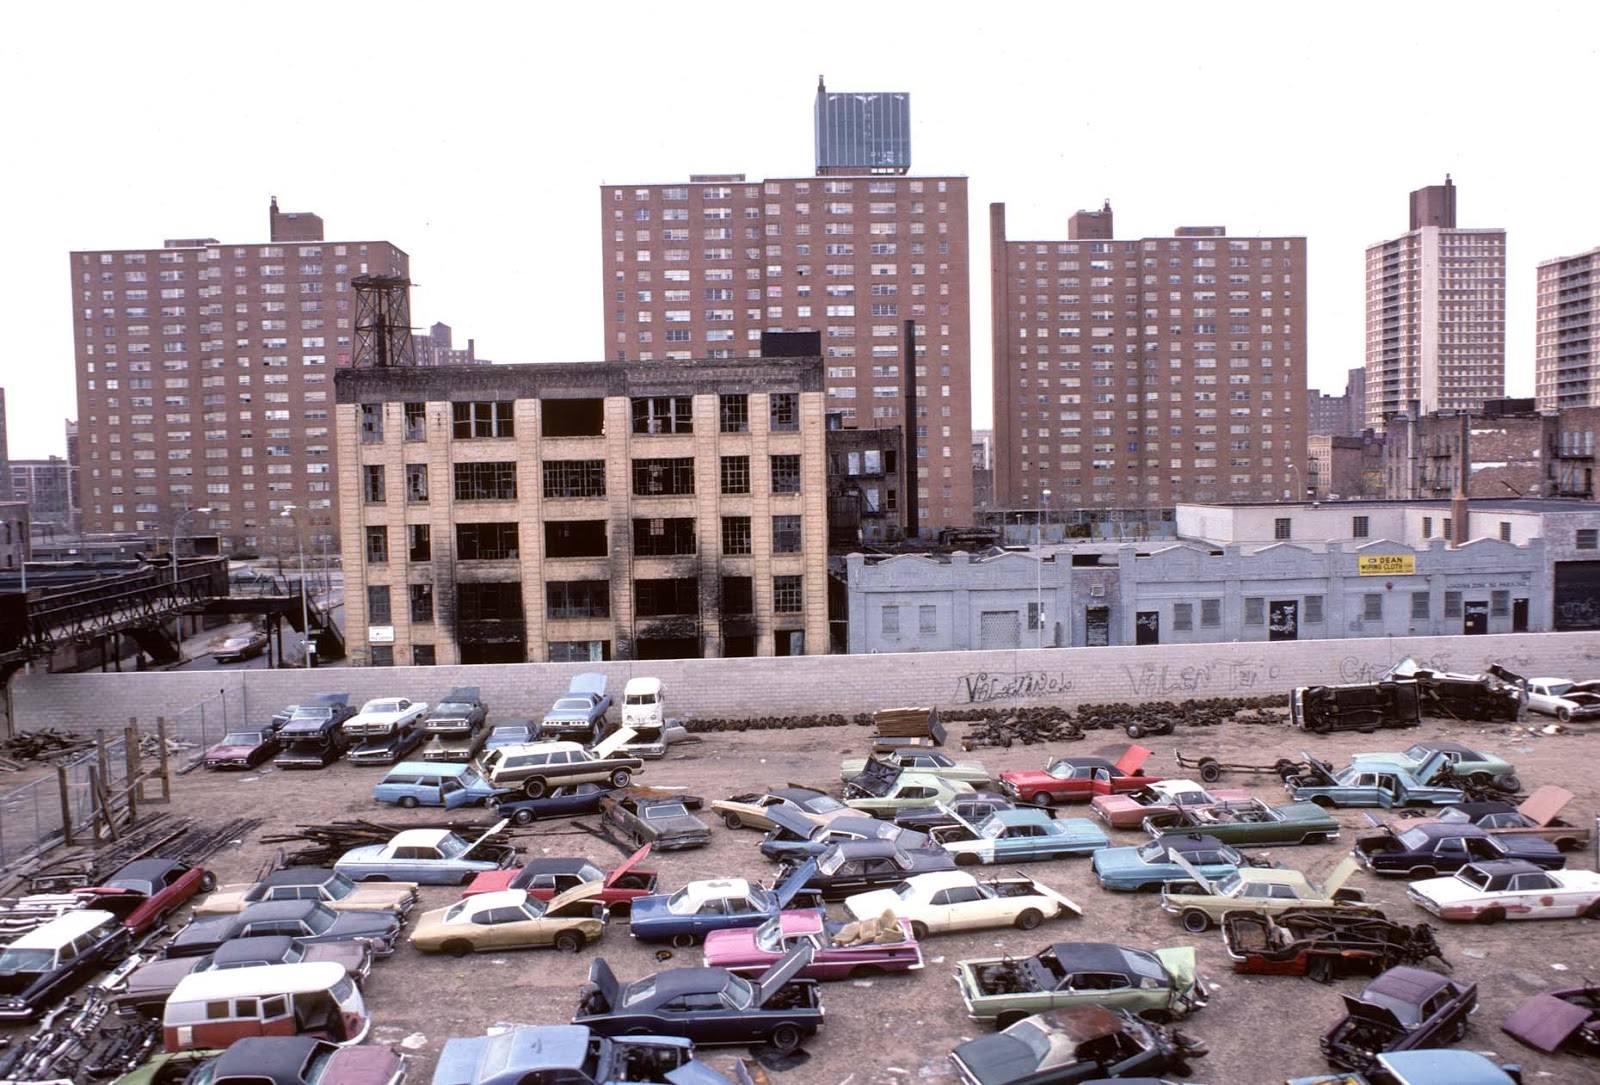 View of Brownsville from the Sutter Ave. stop on the L line, Brooklyn, 1978.